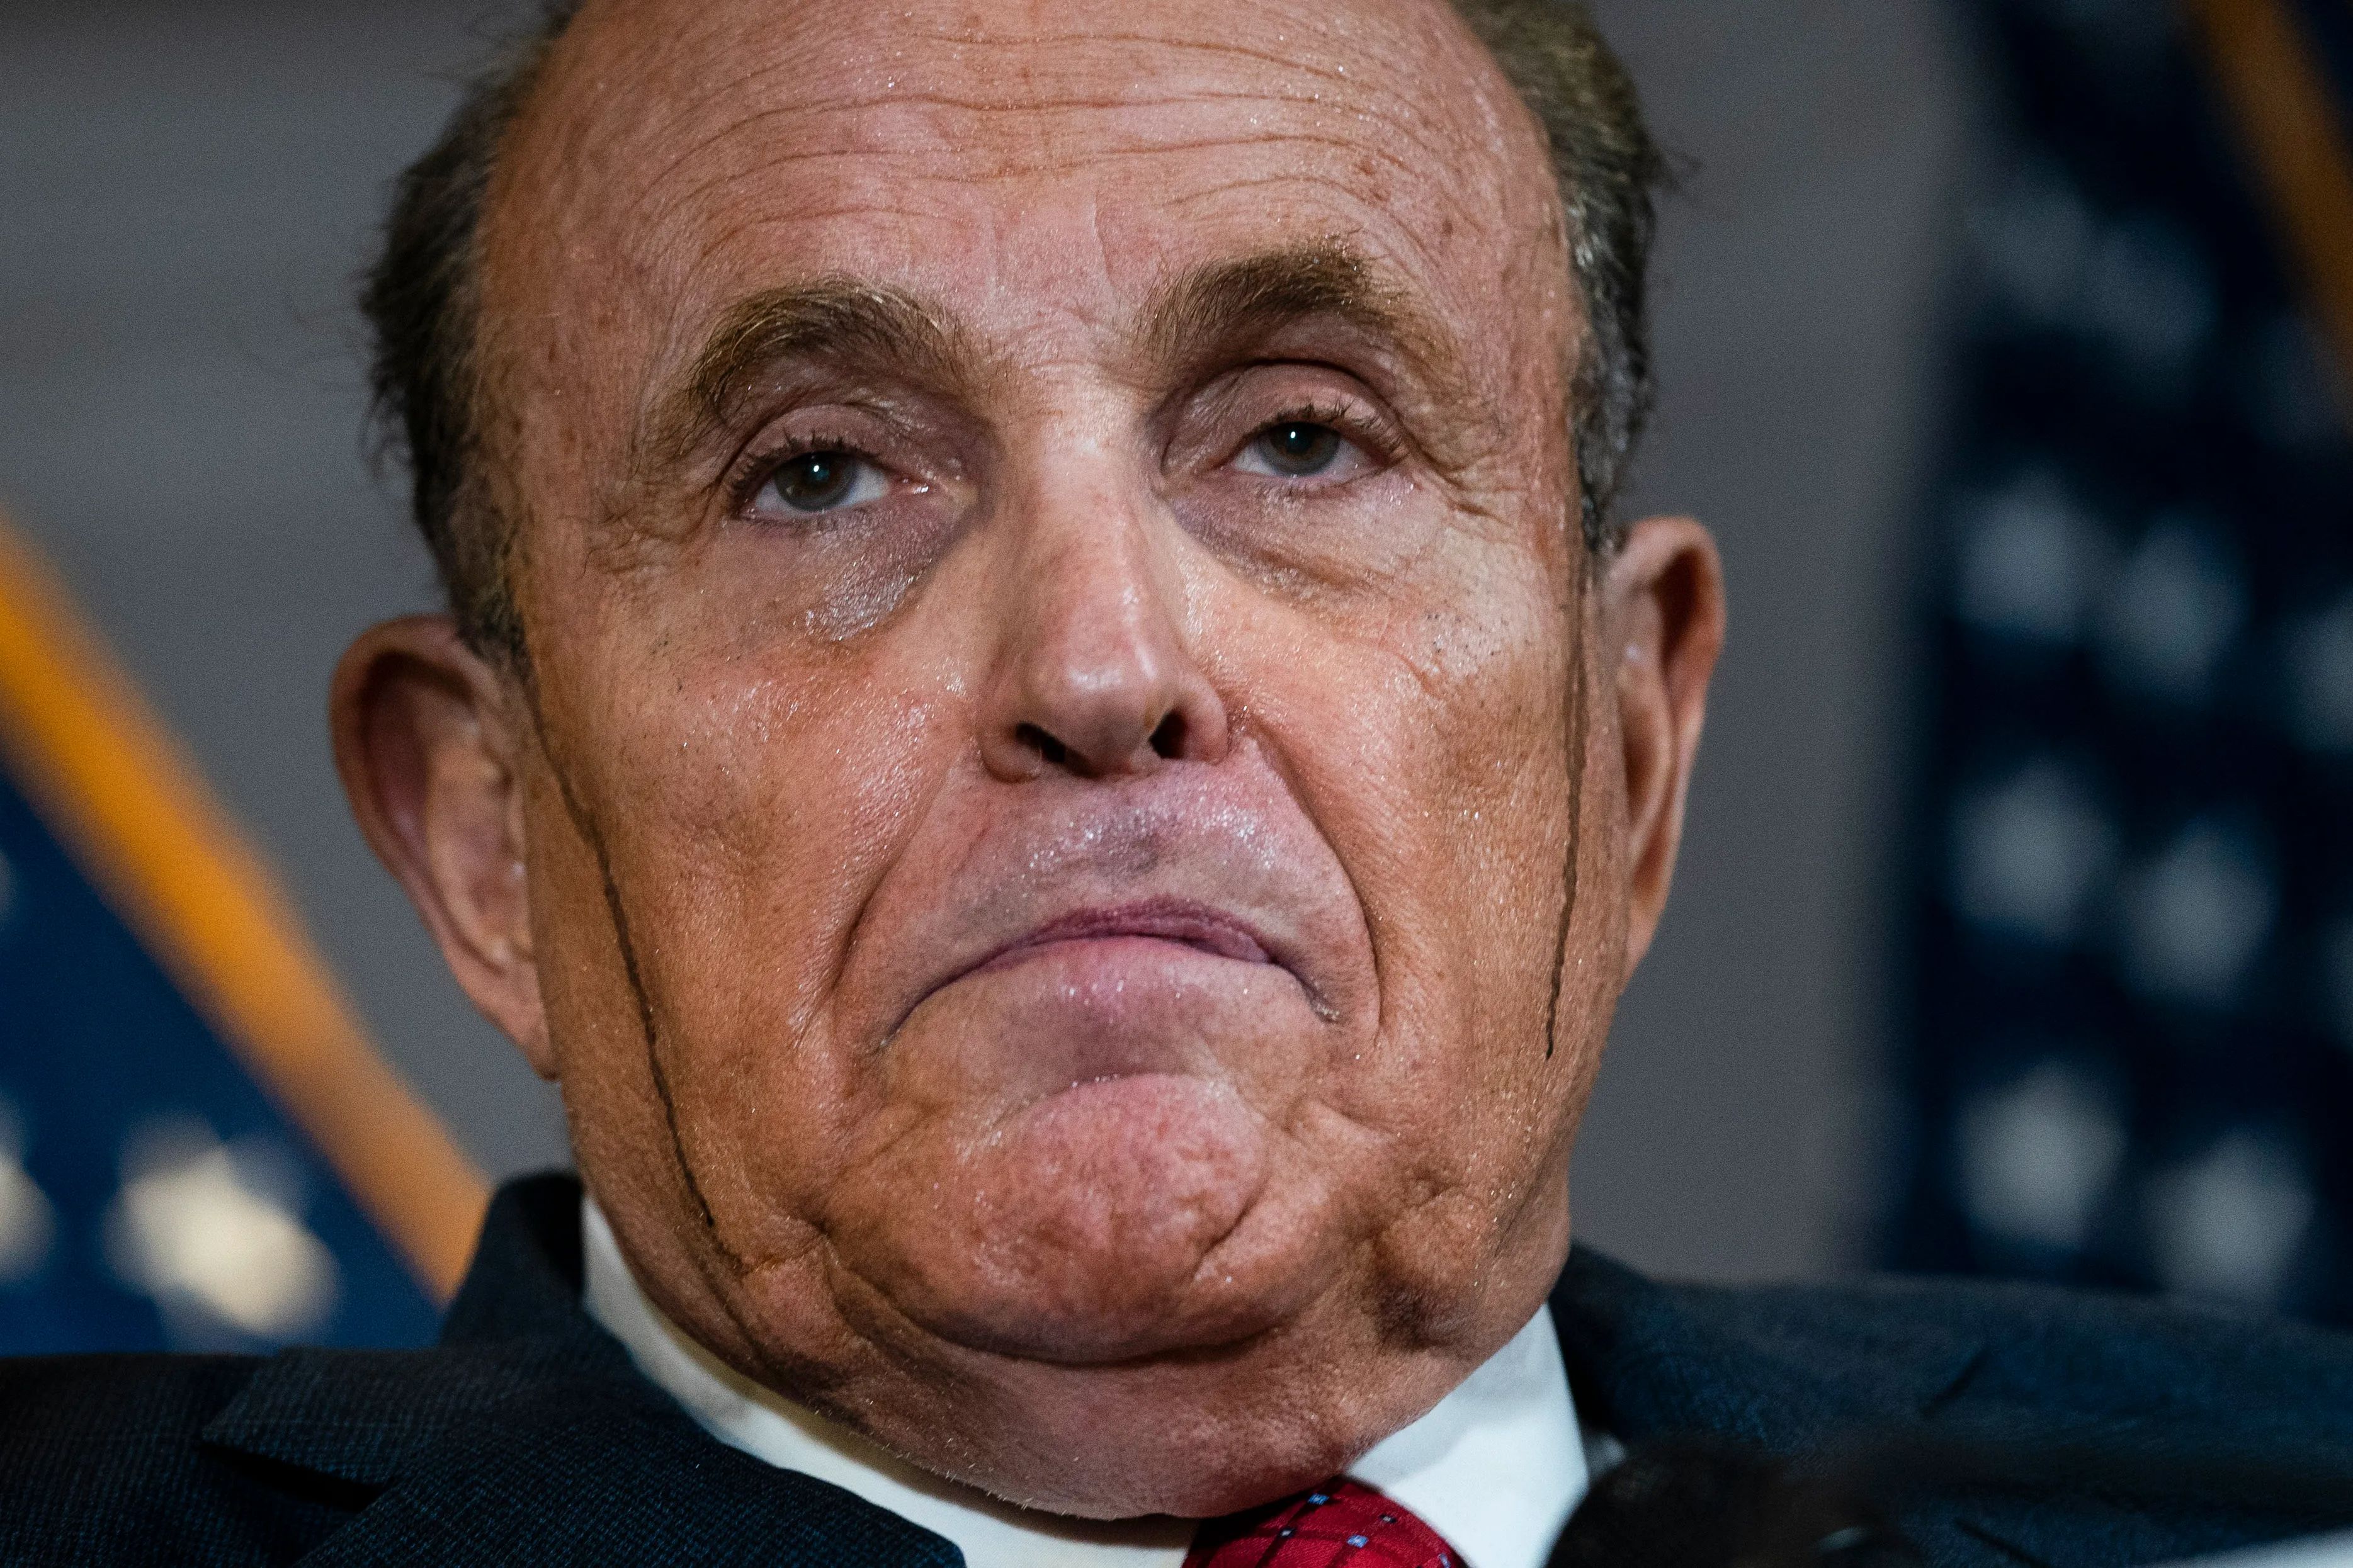 Rudy Giuliani at an event.